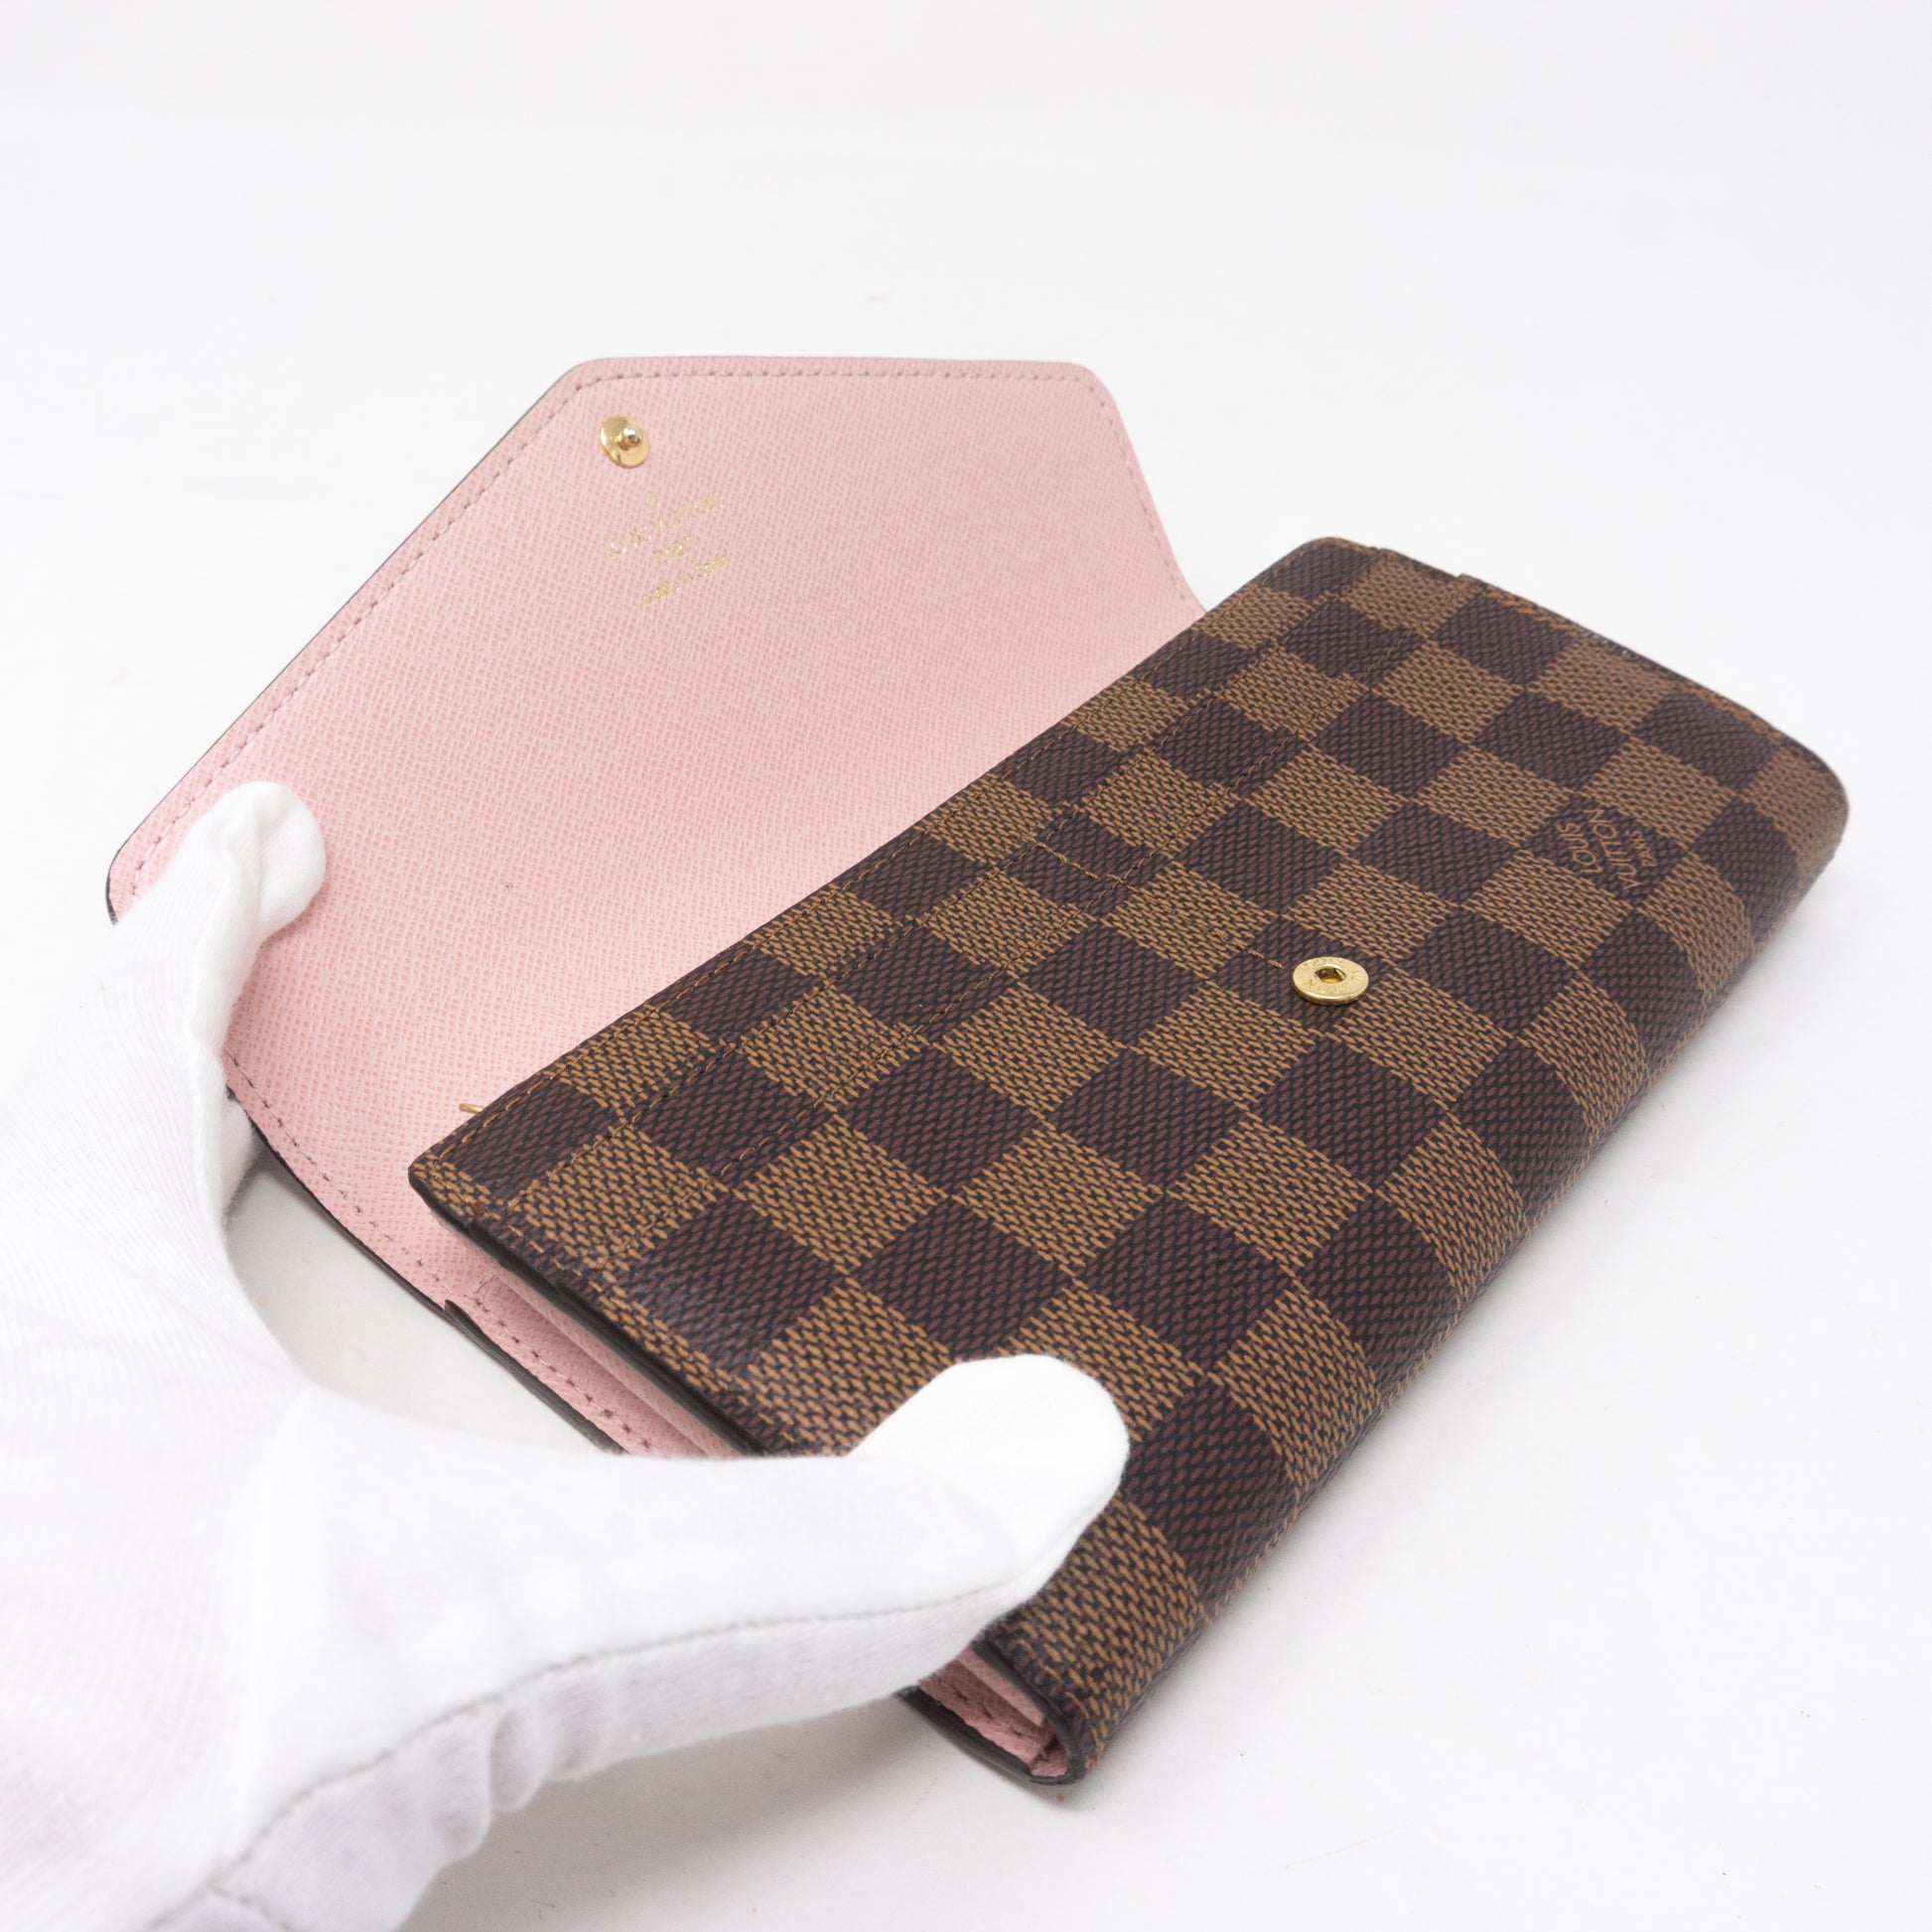 Sarah Wallet Damier Ebène Canvas - Wallets and Small Leather Goods